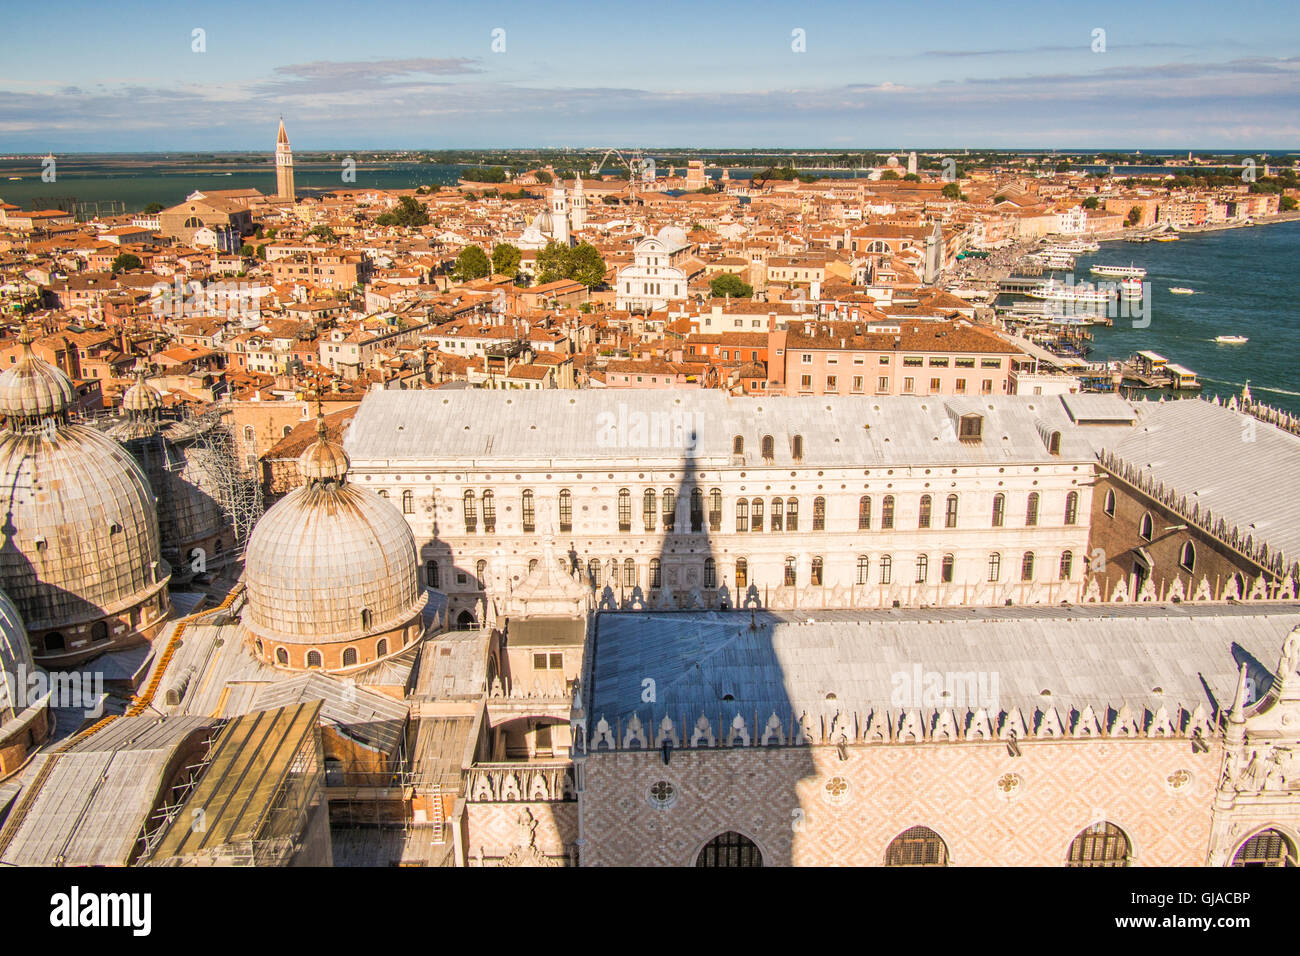 View from the Campanile over the Doges Palace, Venice, Veneto region, Italy. Stock Photo